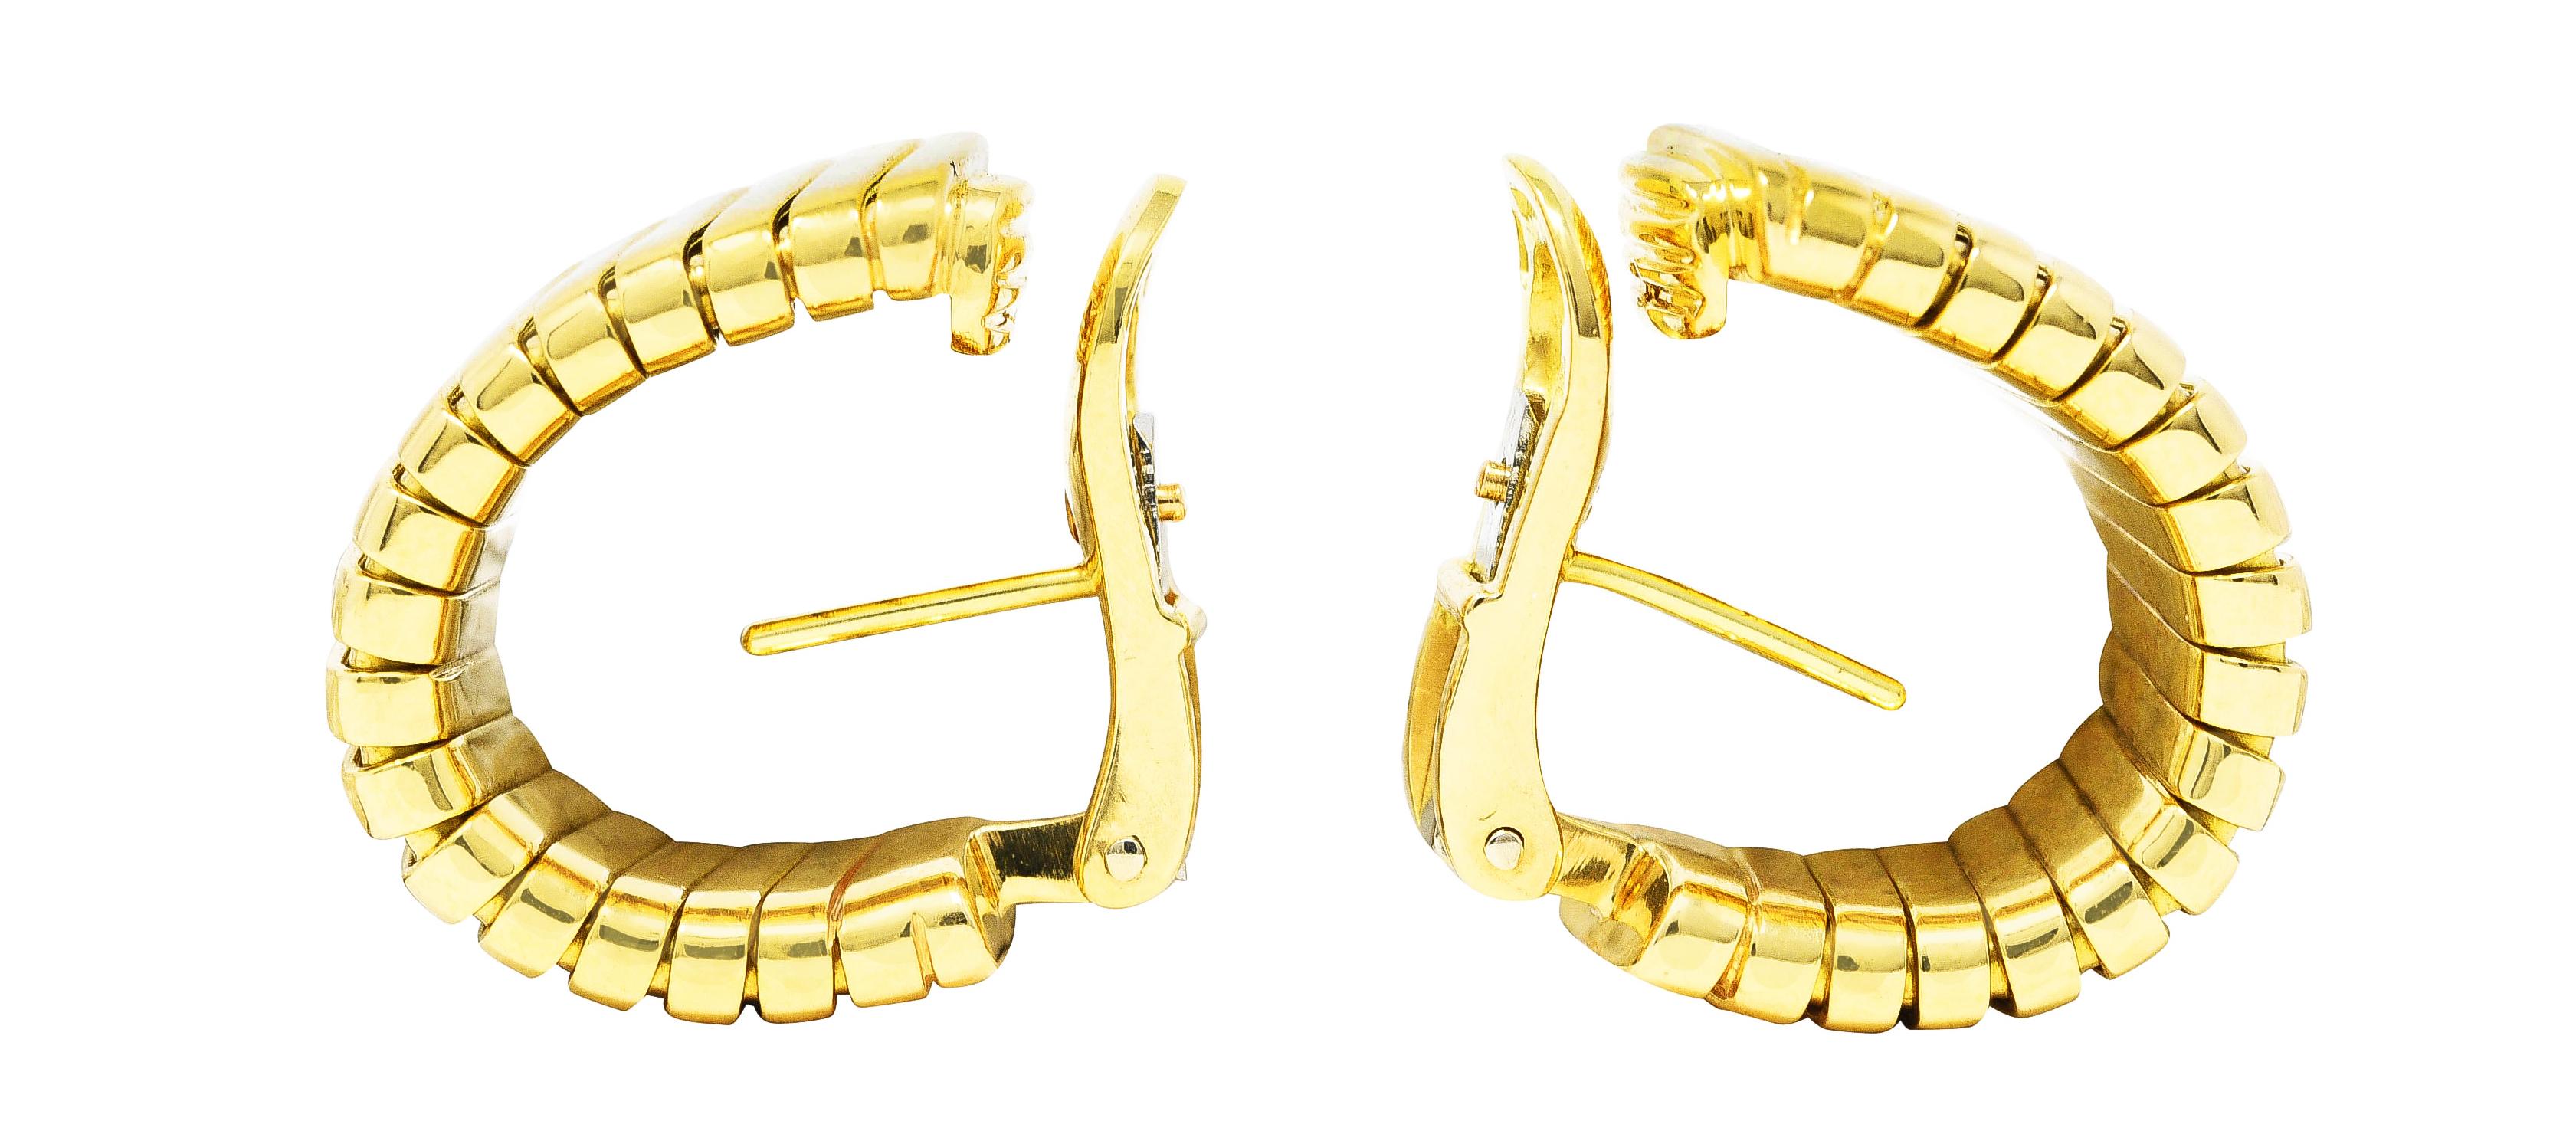 J hoop style earrings are designed as rounded tubogas. Deeply ridged and graduating in size. Completed by posts with hinged omega backs. Stamped 750 with Italian assay marks for 18 karat gold. Fully signed Bulgari, Made in Italy. 
Circa: 1980's.